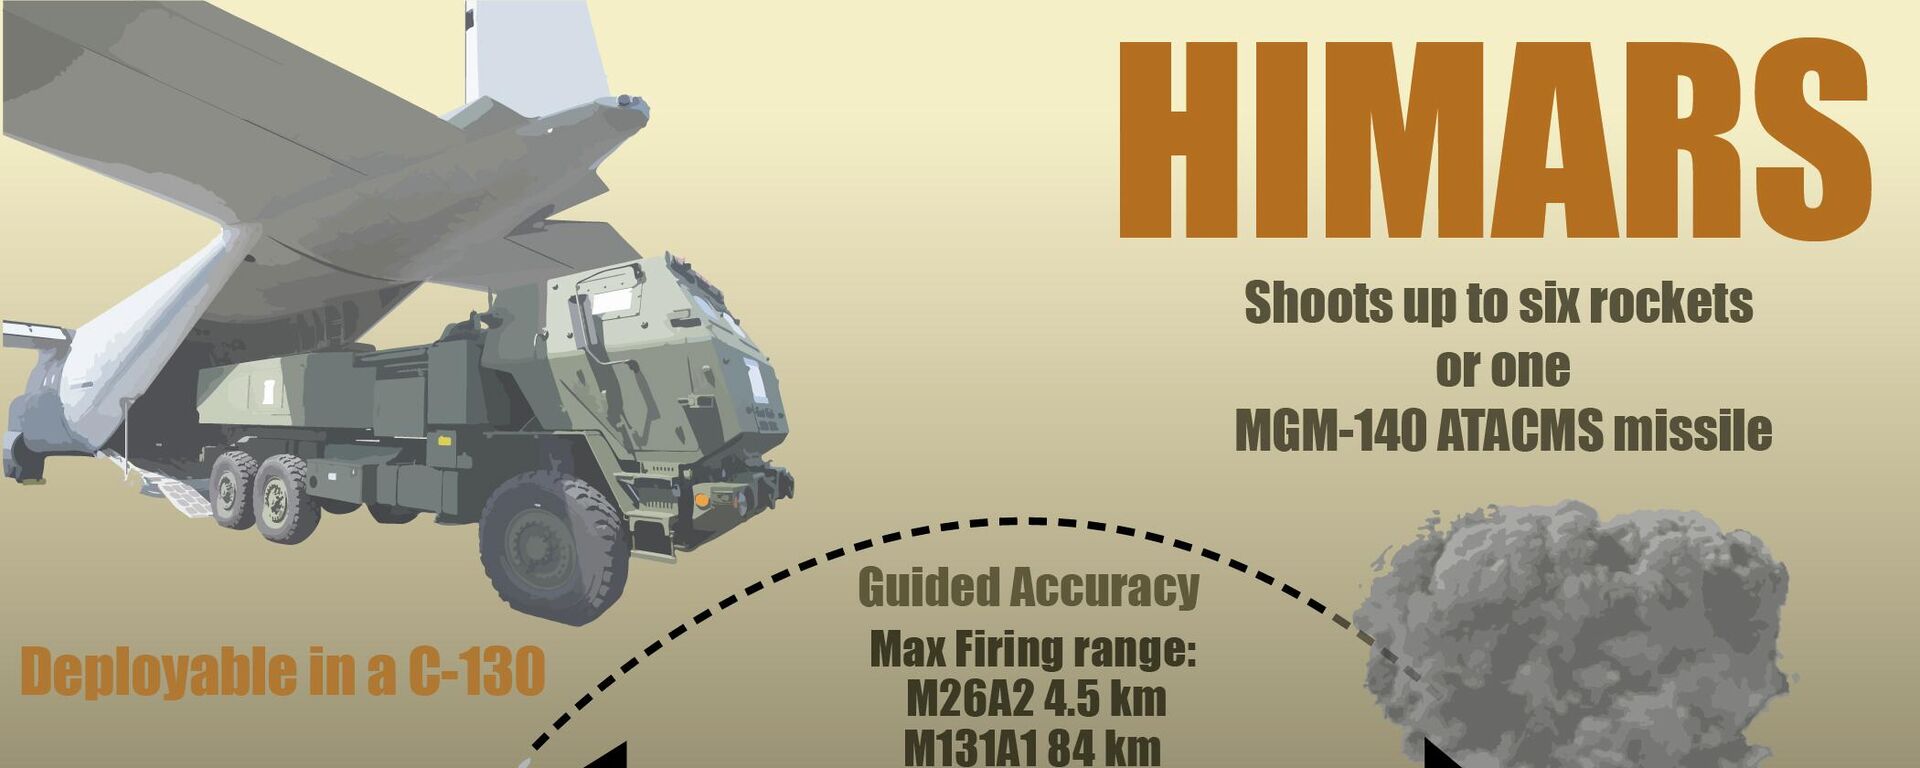 US military infographic showing off features and capabilities of the HIMARS precision rocket artillery system. - Sputnik International, 1920, 04.07.2022